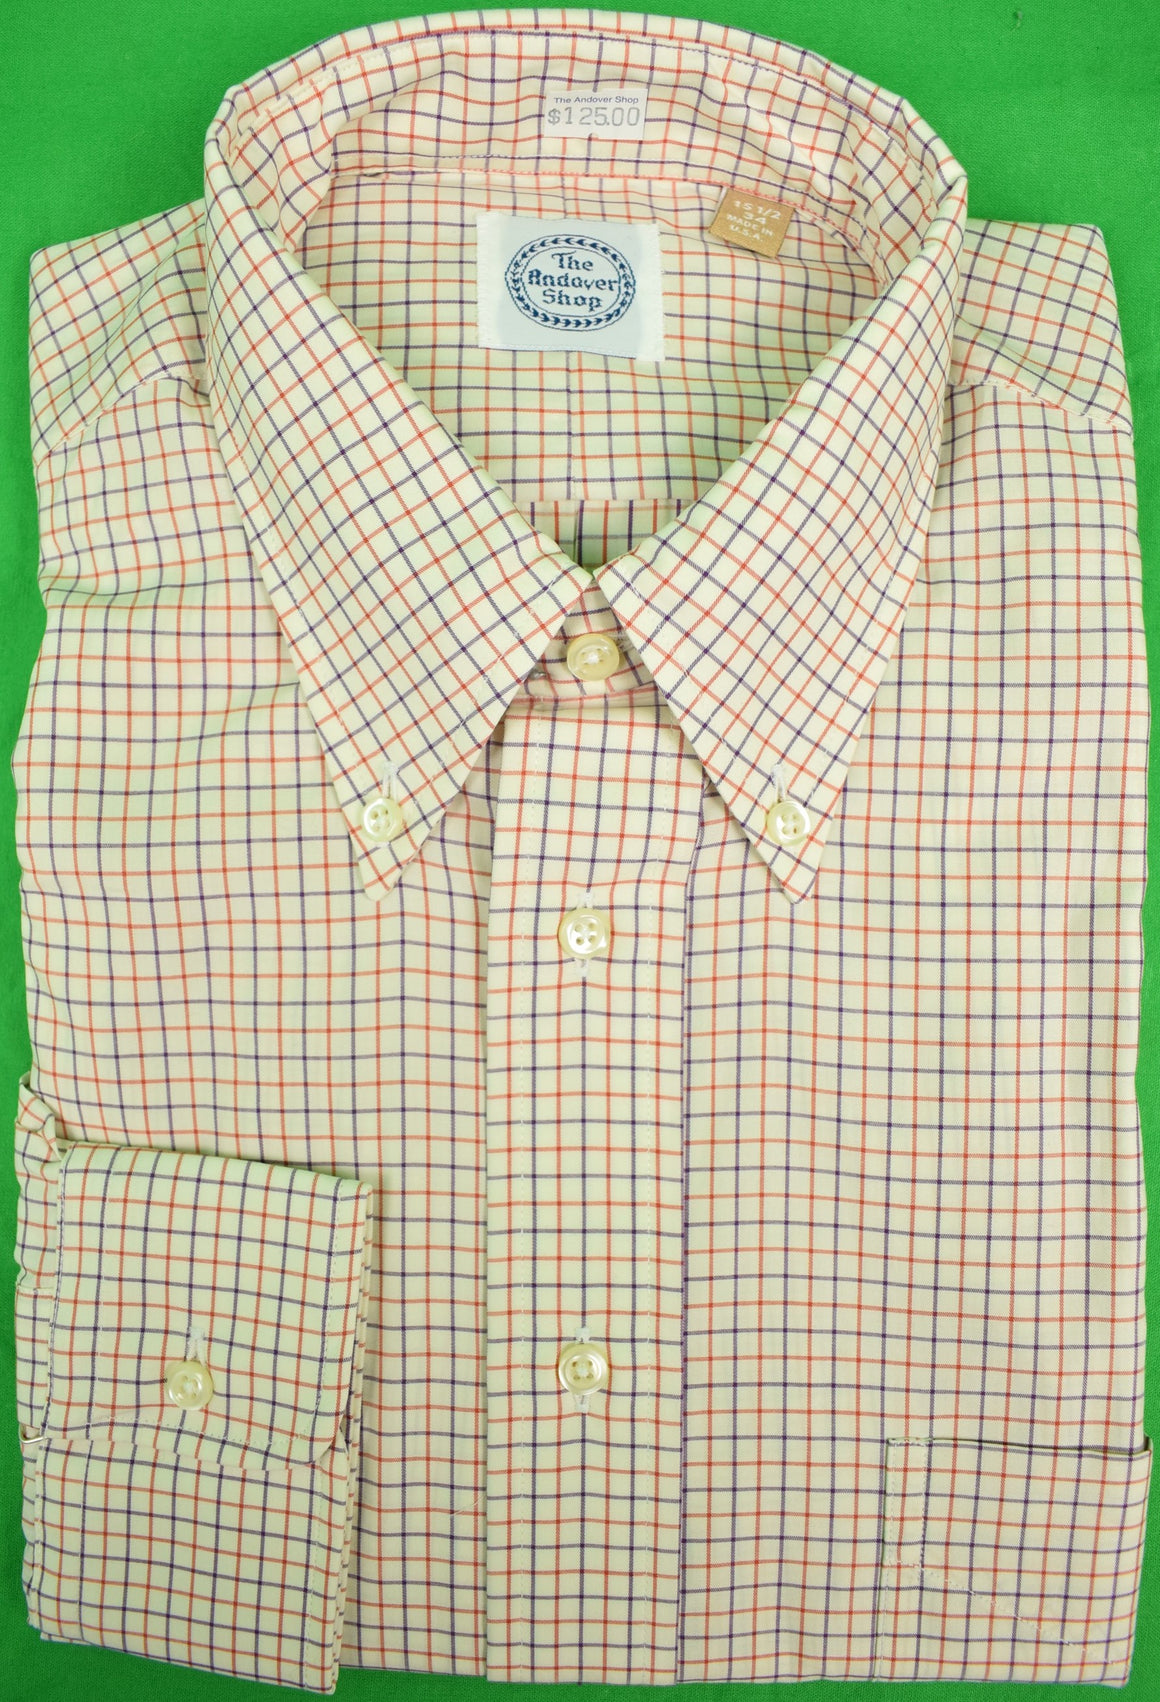 The Andover Shop Red & Blue Tattersall BD Dress Shirt Sz: 15 1/2-34 New w/ Tag! (SOLD)